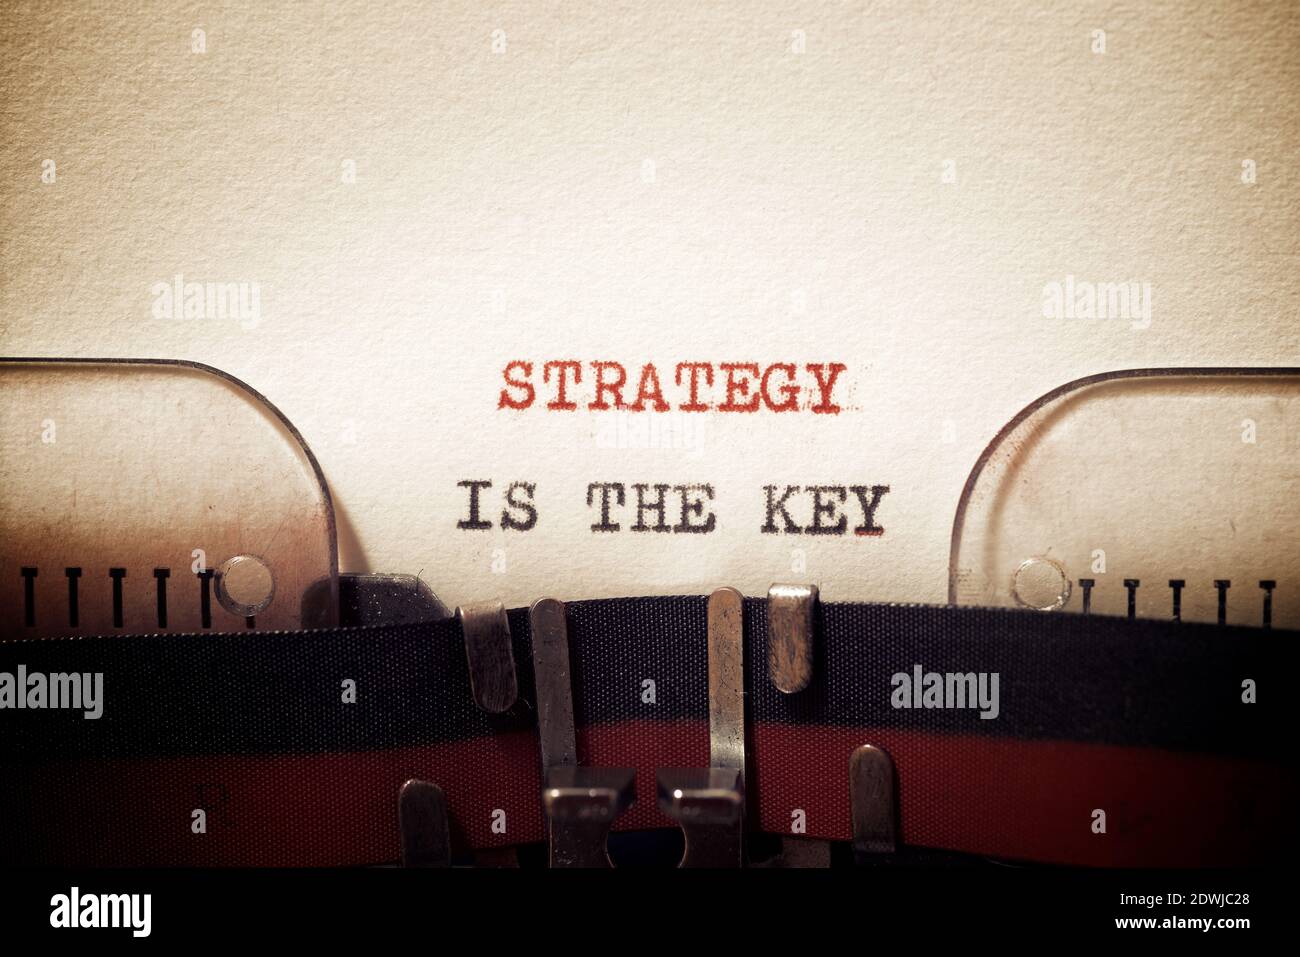 Strategy is the key phrase written with a typewriter. Stock Photo